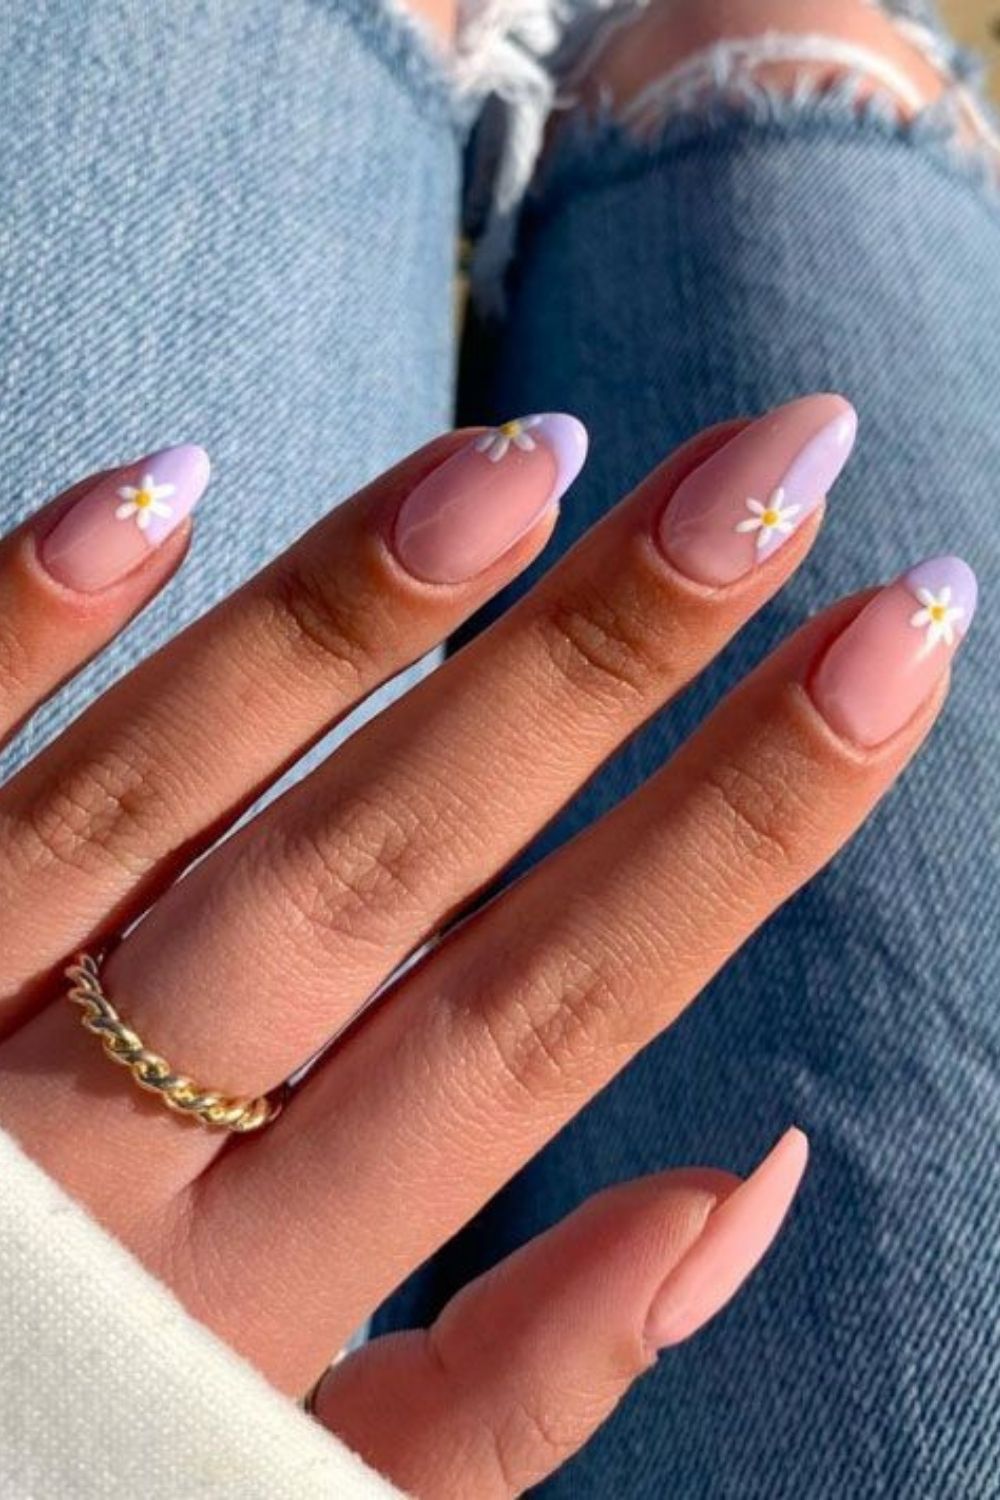 20 Aesthetic Nail Art Designs to Try This Spring & Summer